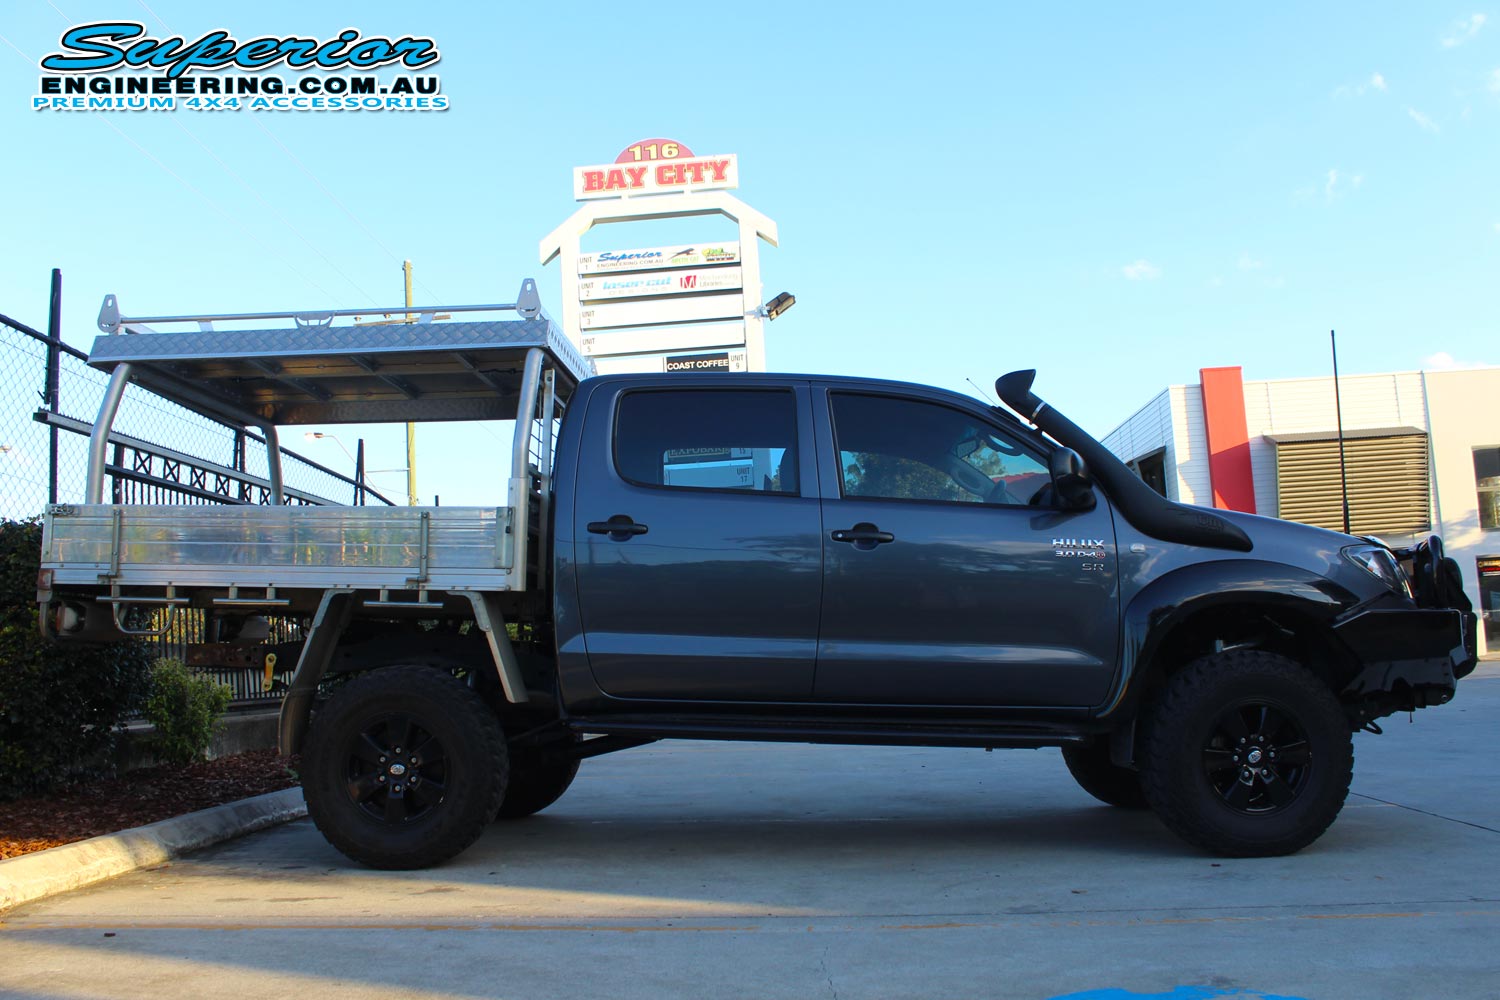 Right side view of a dual cab Toyota Hilux fitted with a complete range of 4x4 accessories and 3 inch lift kit